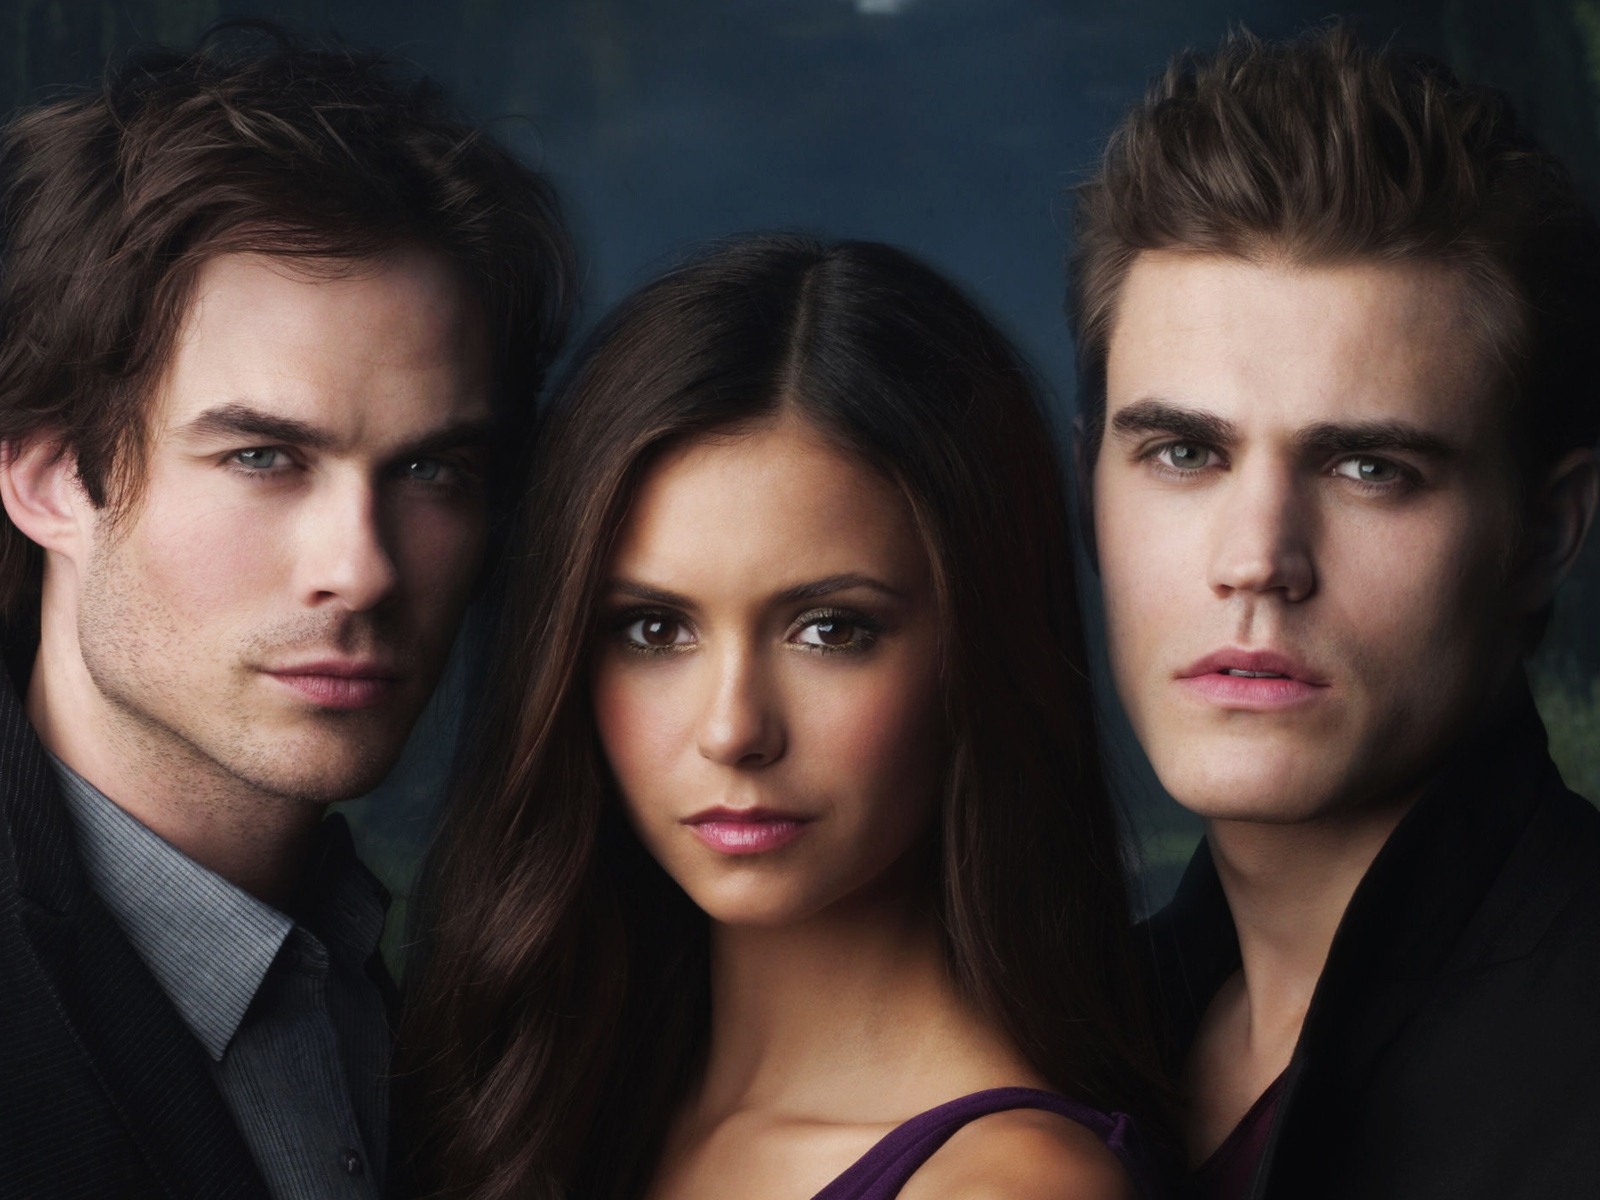 The Vampire Diaries HD Wallpapers #4 - 1600x1200